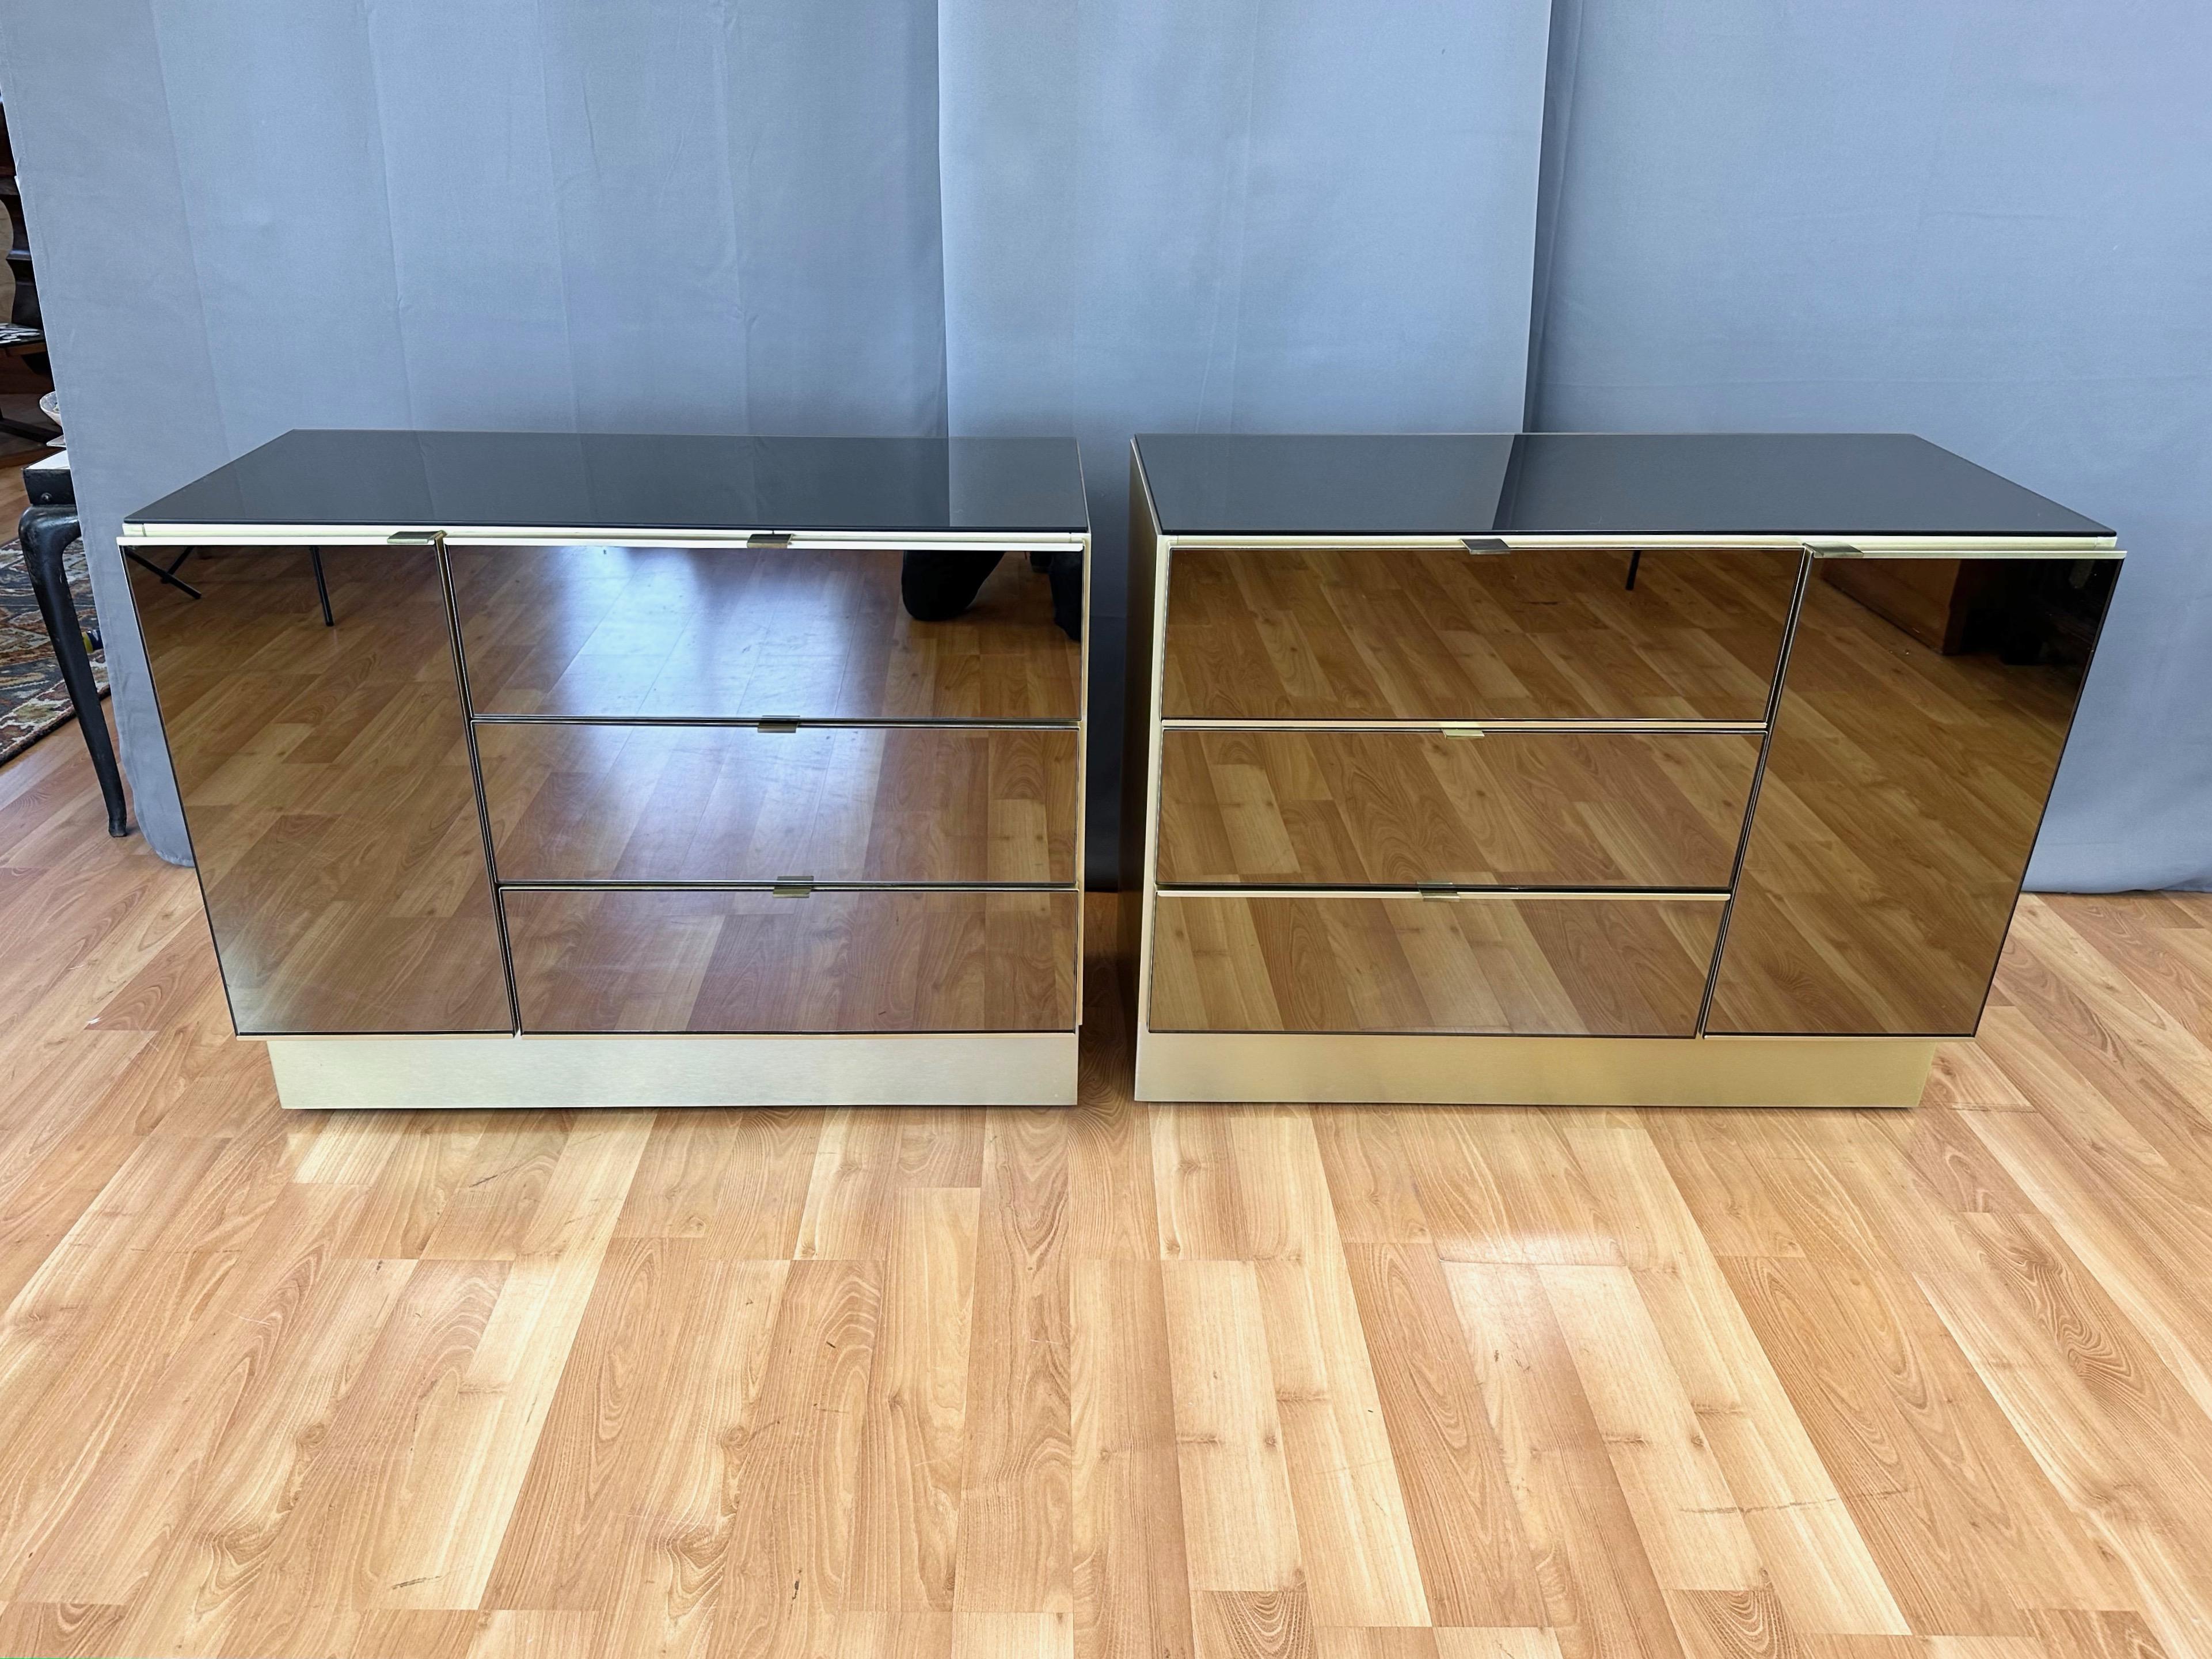 A super chic late 1970s/early 1980s mirrored bachelor chest with brass-colored anodized aluminum sides by O.B. Solie for Ello Furniture Company. Two available, with ‘A’ on the left and ‘B’ on the right in the primary image.

Minimalist Hollywood